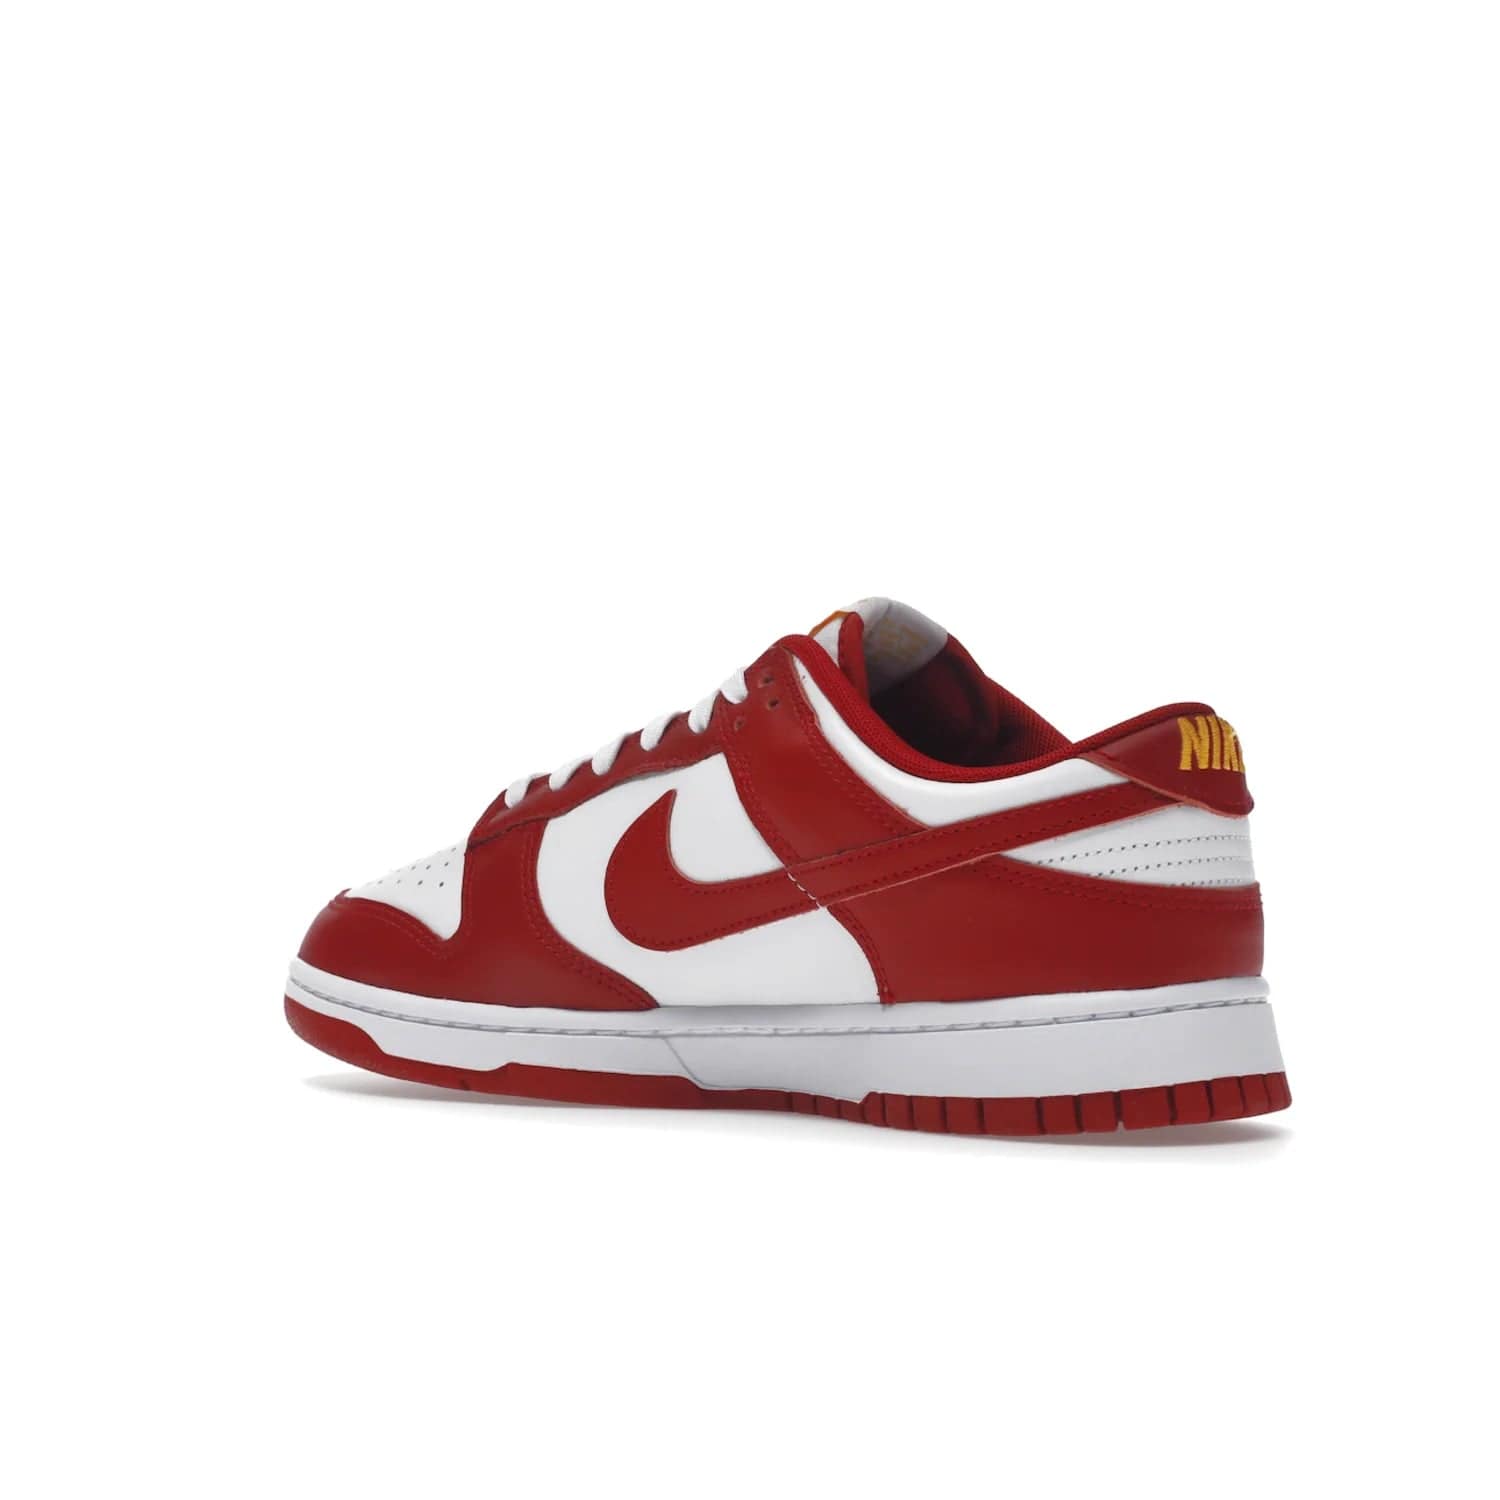 Nike Dunk Low USC - Image 23 - Only at www.BallersClubKickz.com - The Nike Dunk Low USC DD1391-602 colorway captures the eye of University of Southern California fans. Crafted with leather and rubber upper and outsole, this stylish sneaker features a white, gym red, and yellow colorway. With yellow Nike branding, white perforated vamp, and red suede Swoosh, this sneaker turns heads. Get the classic Nike Dunk Low USC releasing on November 9th, 2022.